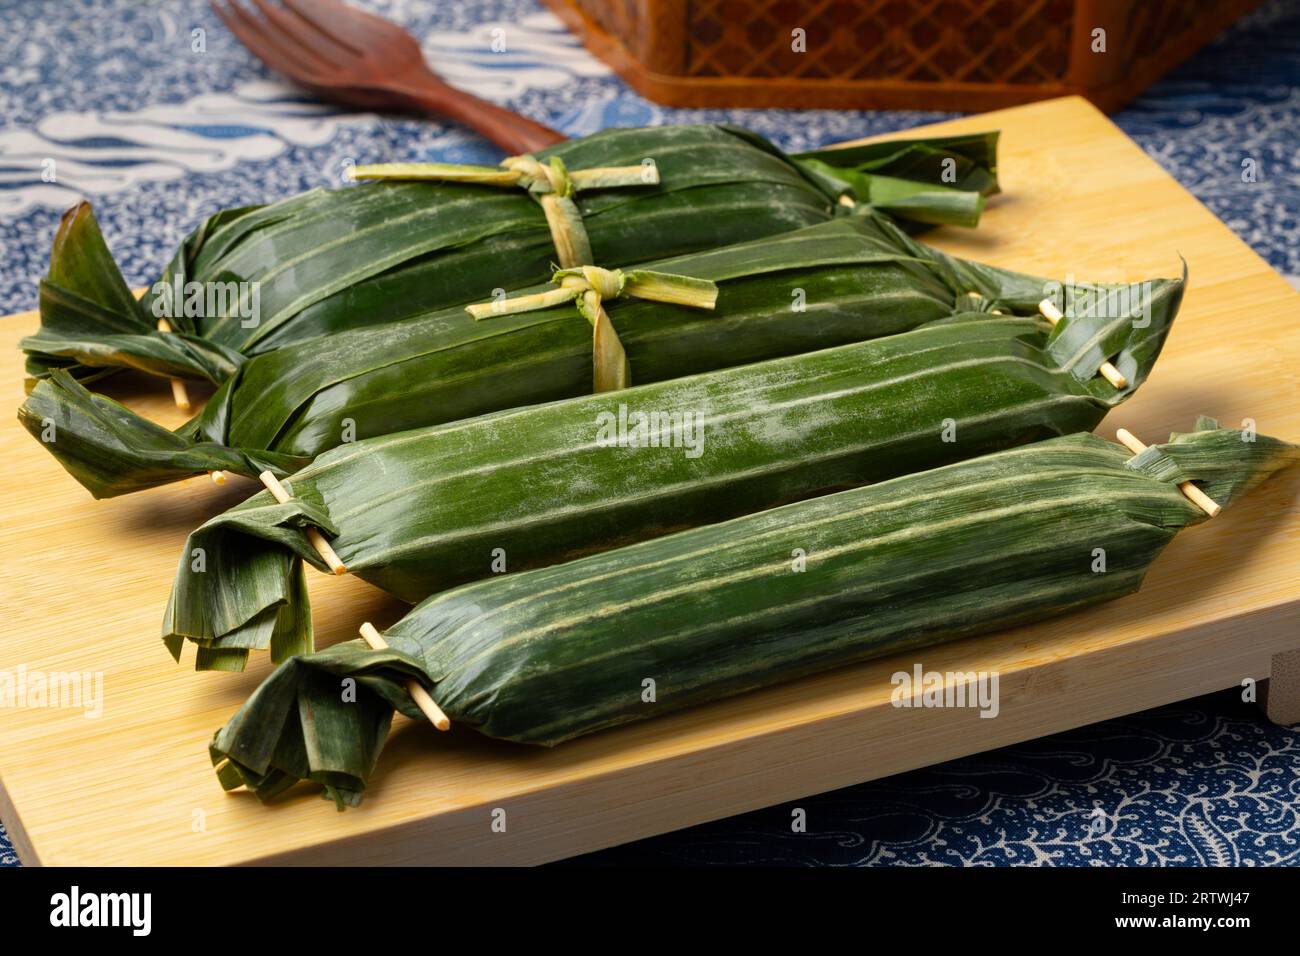 Whole Lemper Ayam wrapped in banana leaves, an Indonesian savoury snack made of glutinous rice filled with seasoned shredded chicken close up Stock Photo